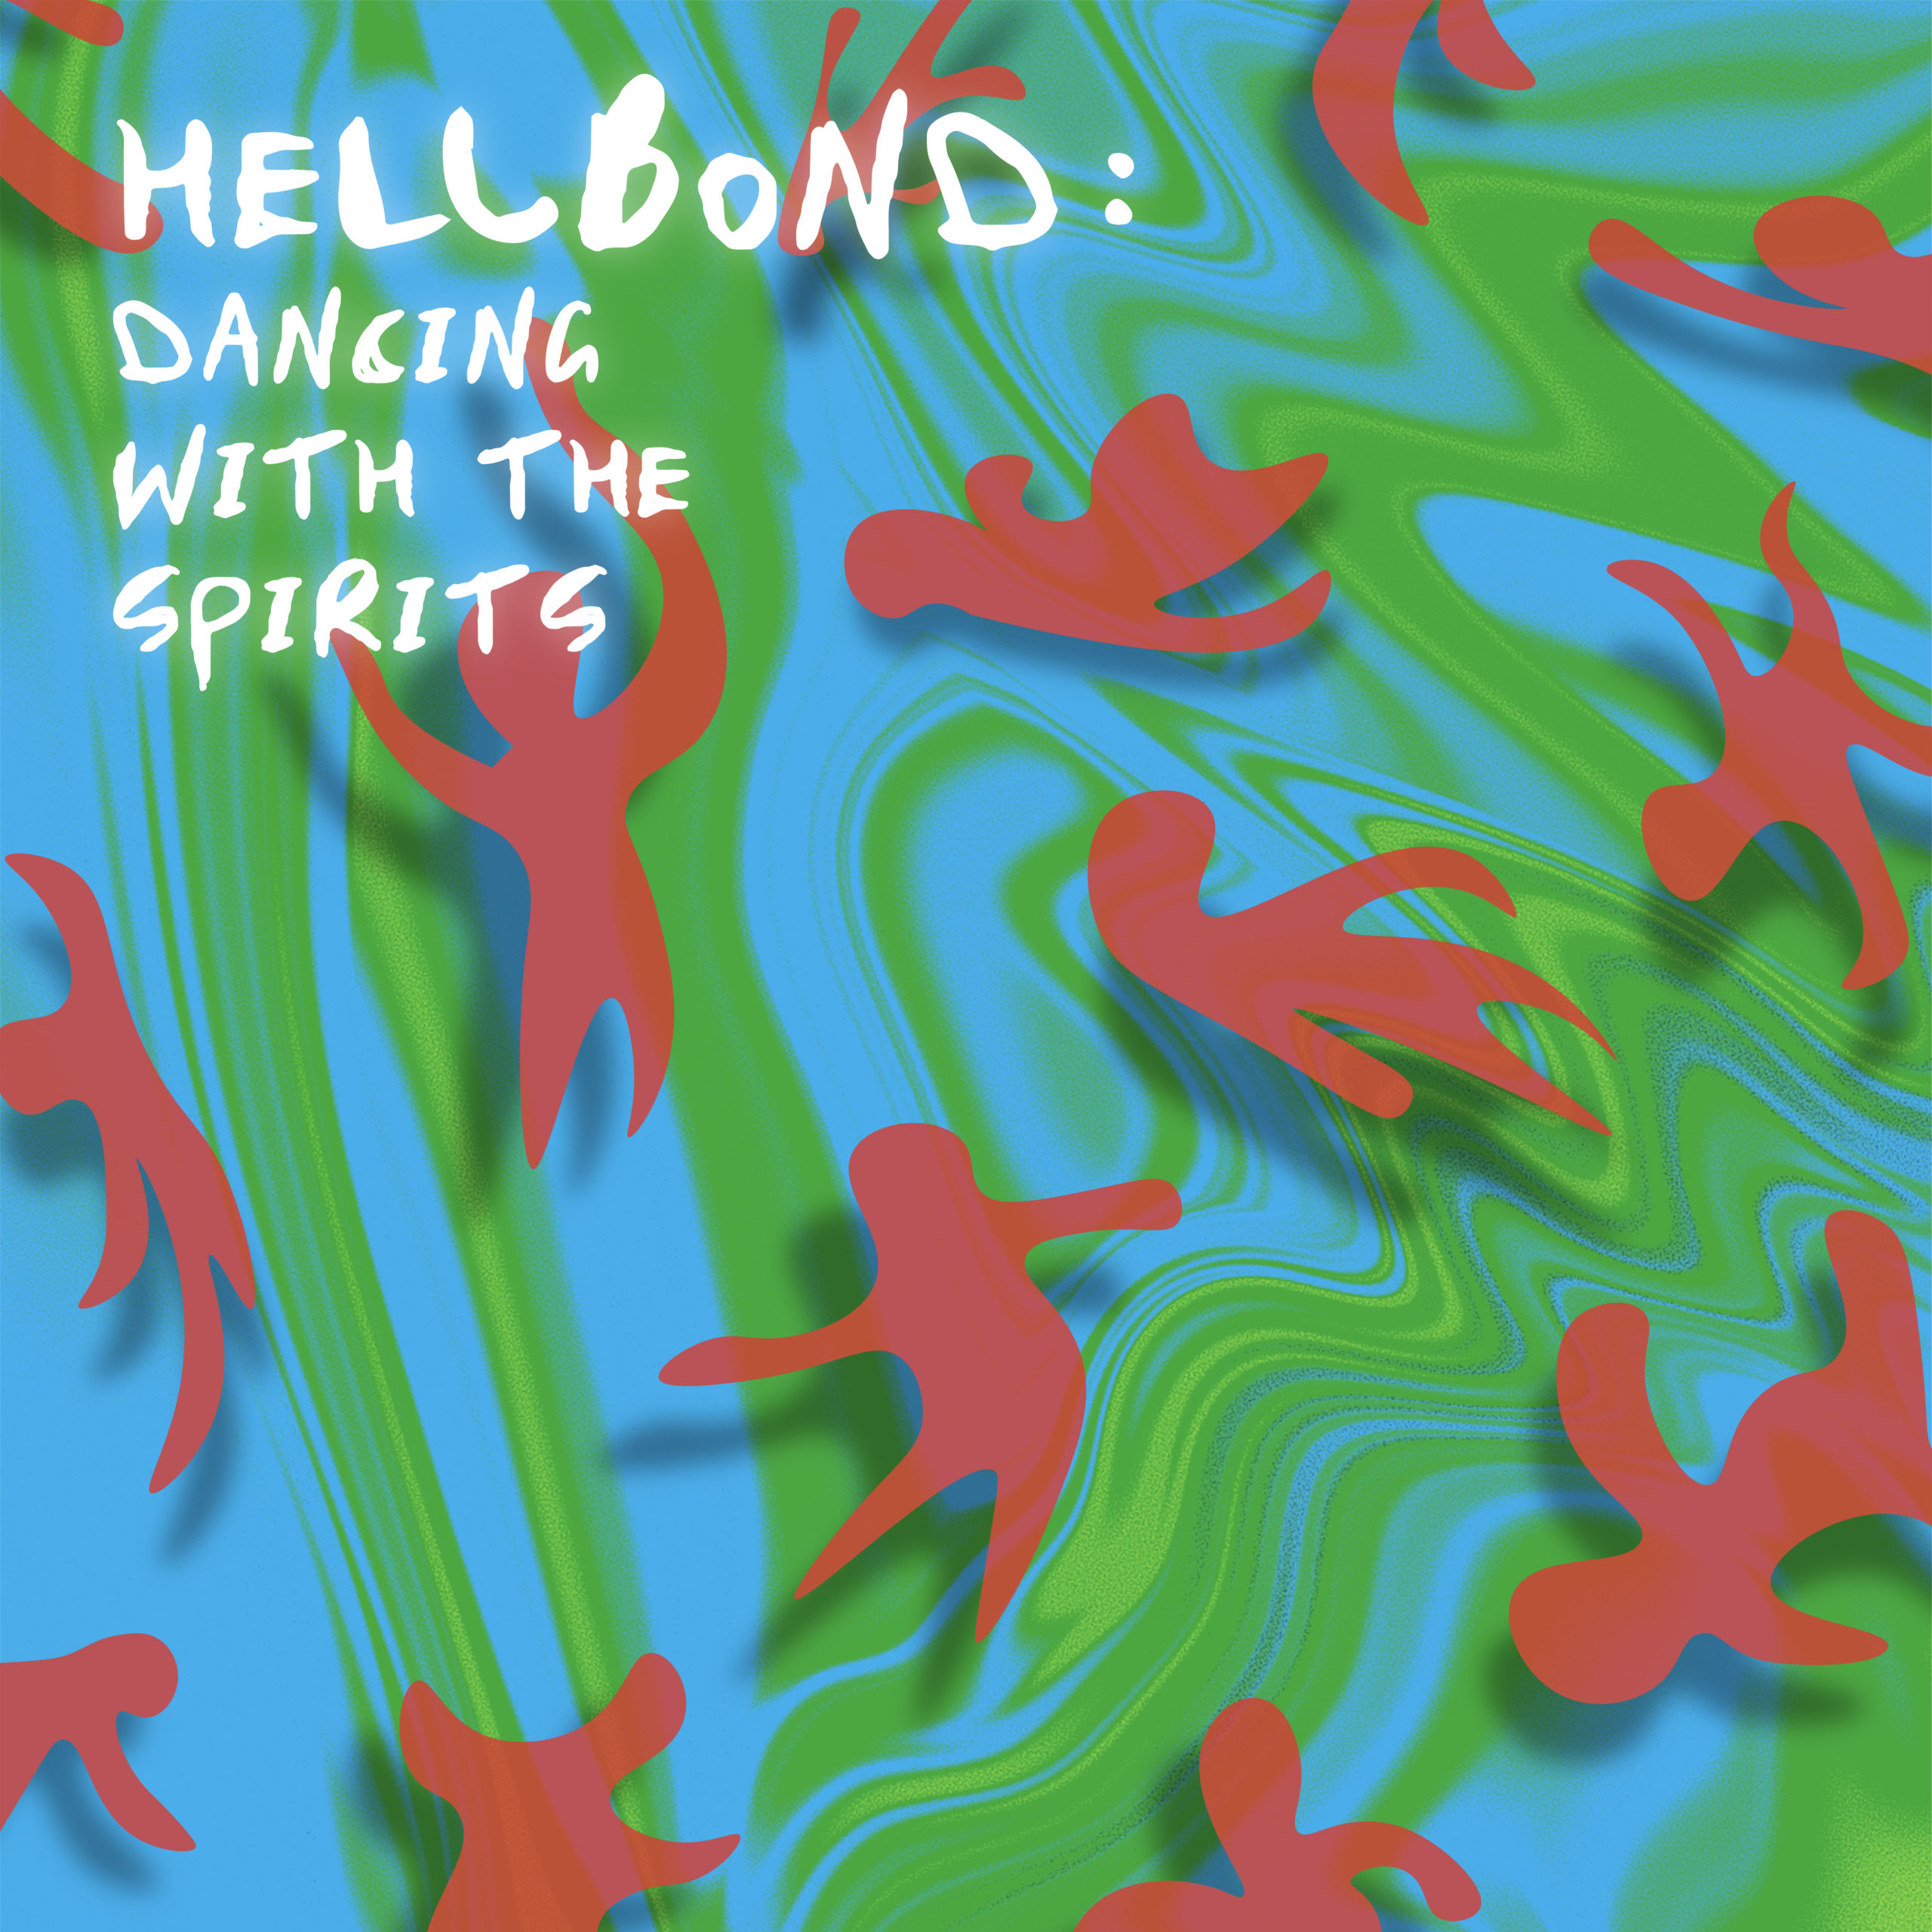 Red silhouettes of bodies fall and sway on top of a blue and green swirled background. Text in white wobbly letters spells, "HellBond: Dancing with the Spirits" in the top left corner.